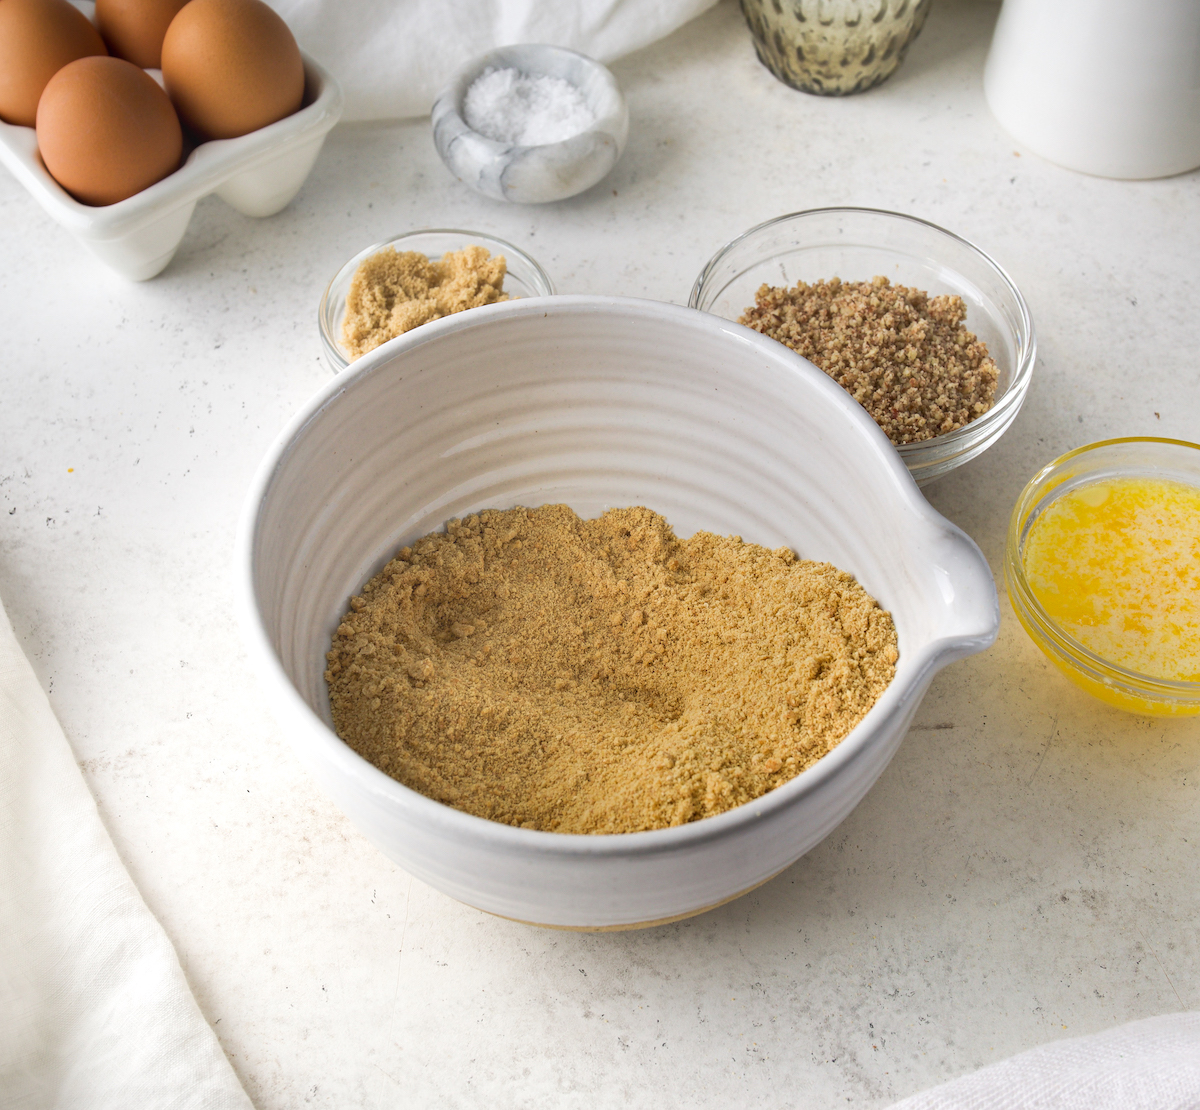 Ground up graham crackers in a bowl.